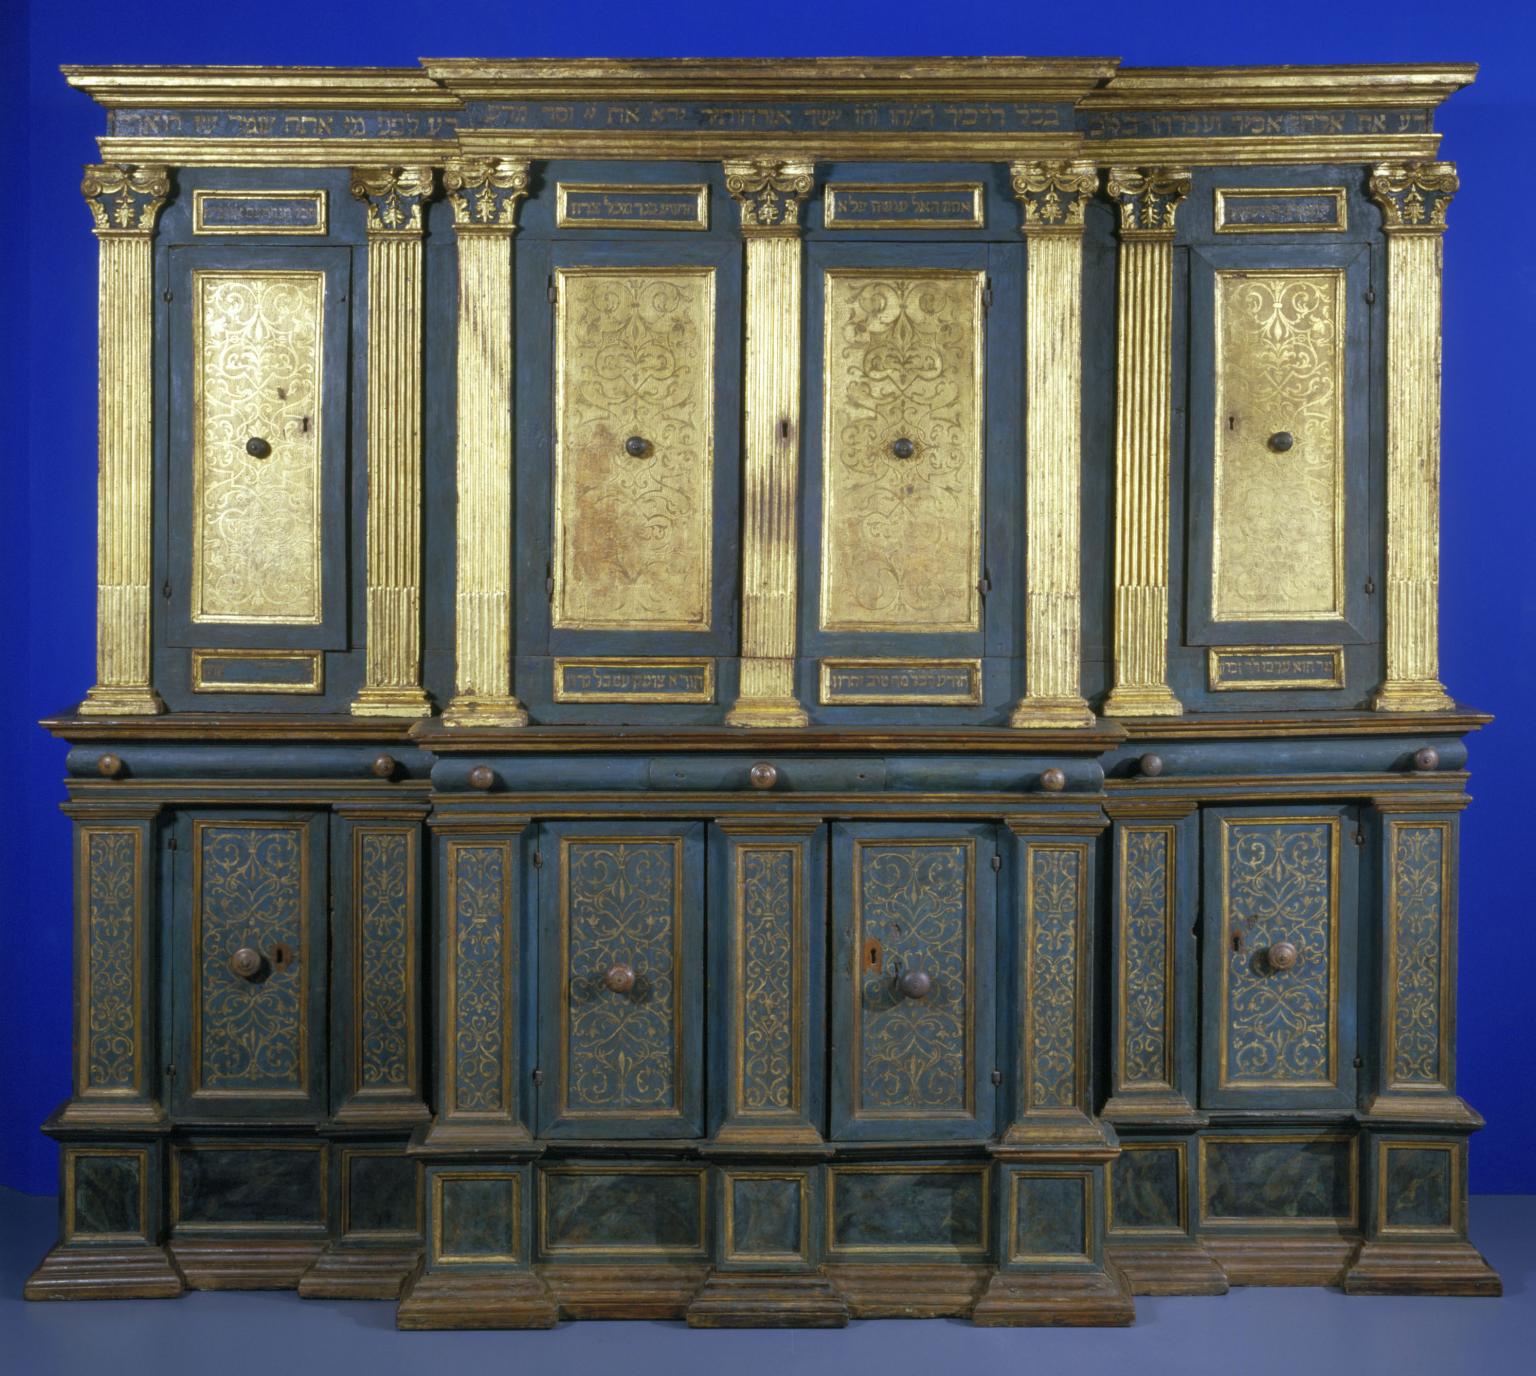 Photograph of ornamental Torah ark chamber with gilded columns and doors with filigree and Hebrew writing. 